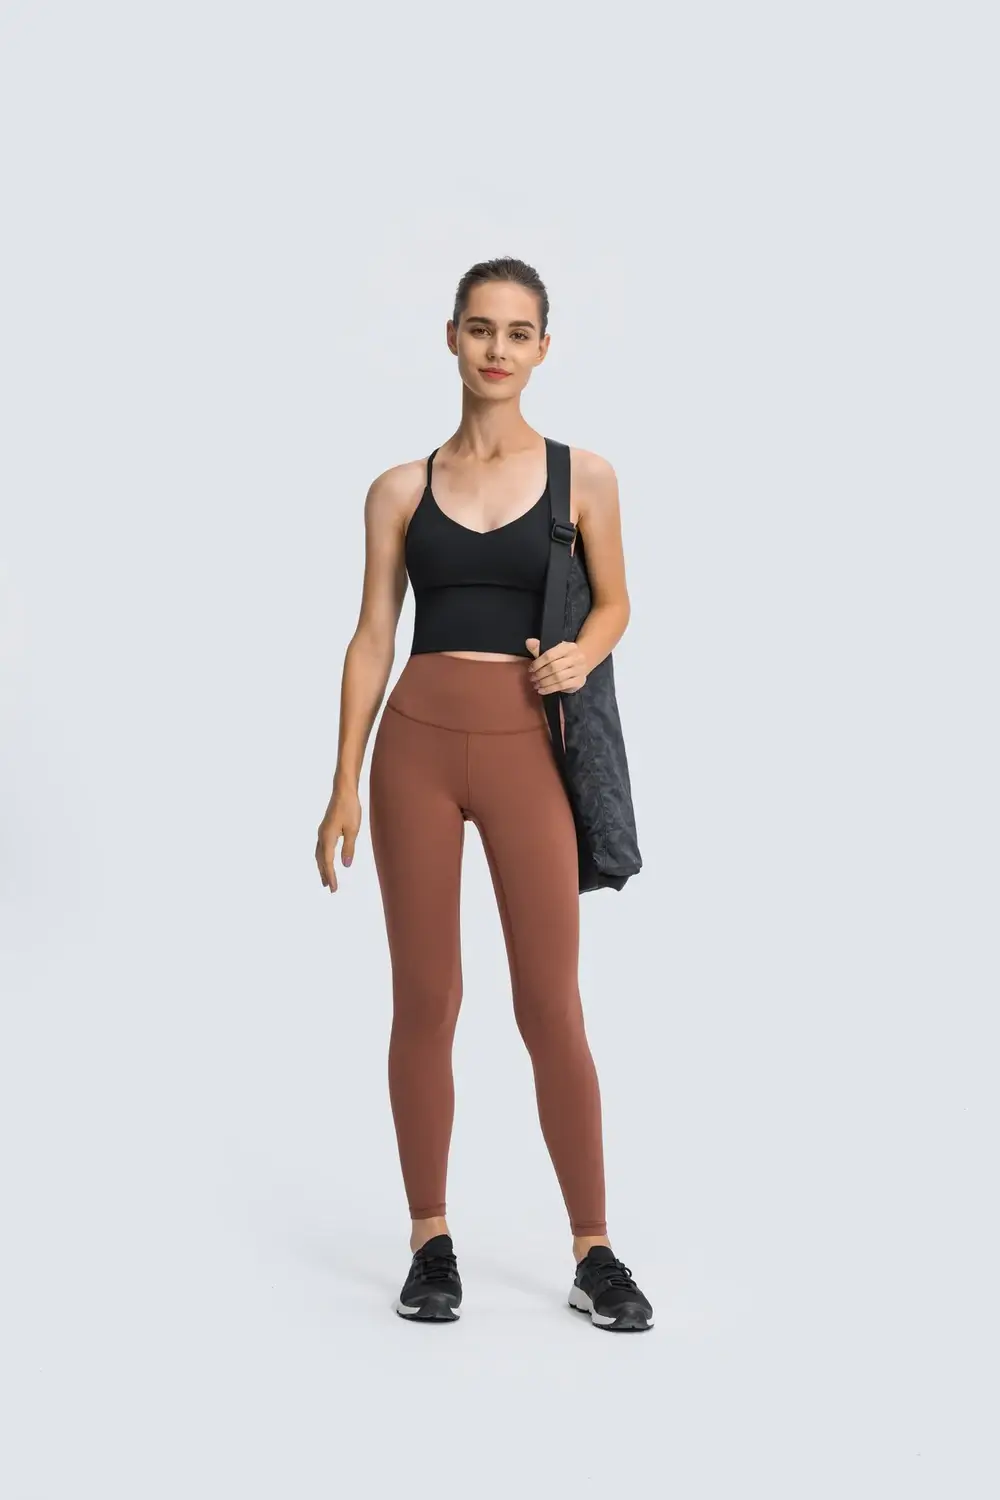 The Best Yoga Gear For A Smooth Workout – Gymwearmovement